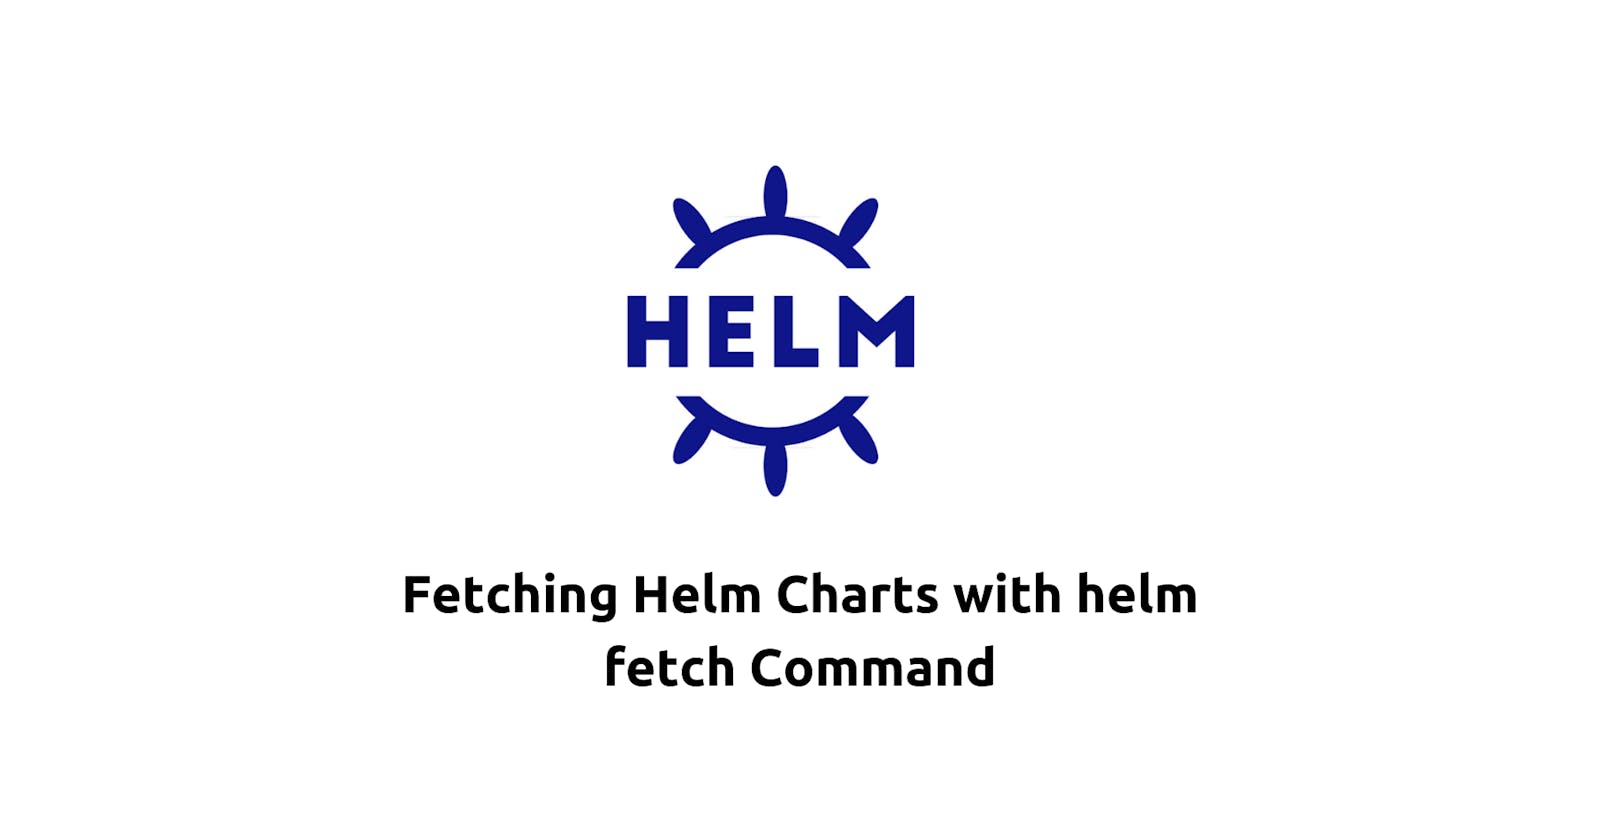 Fetching Helm Charts with helm fetch Command